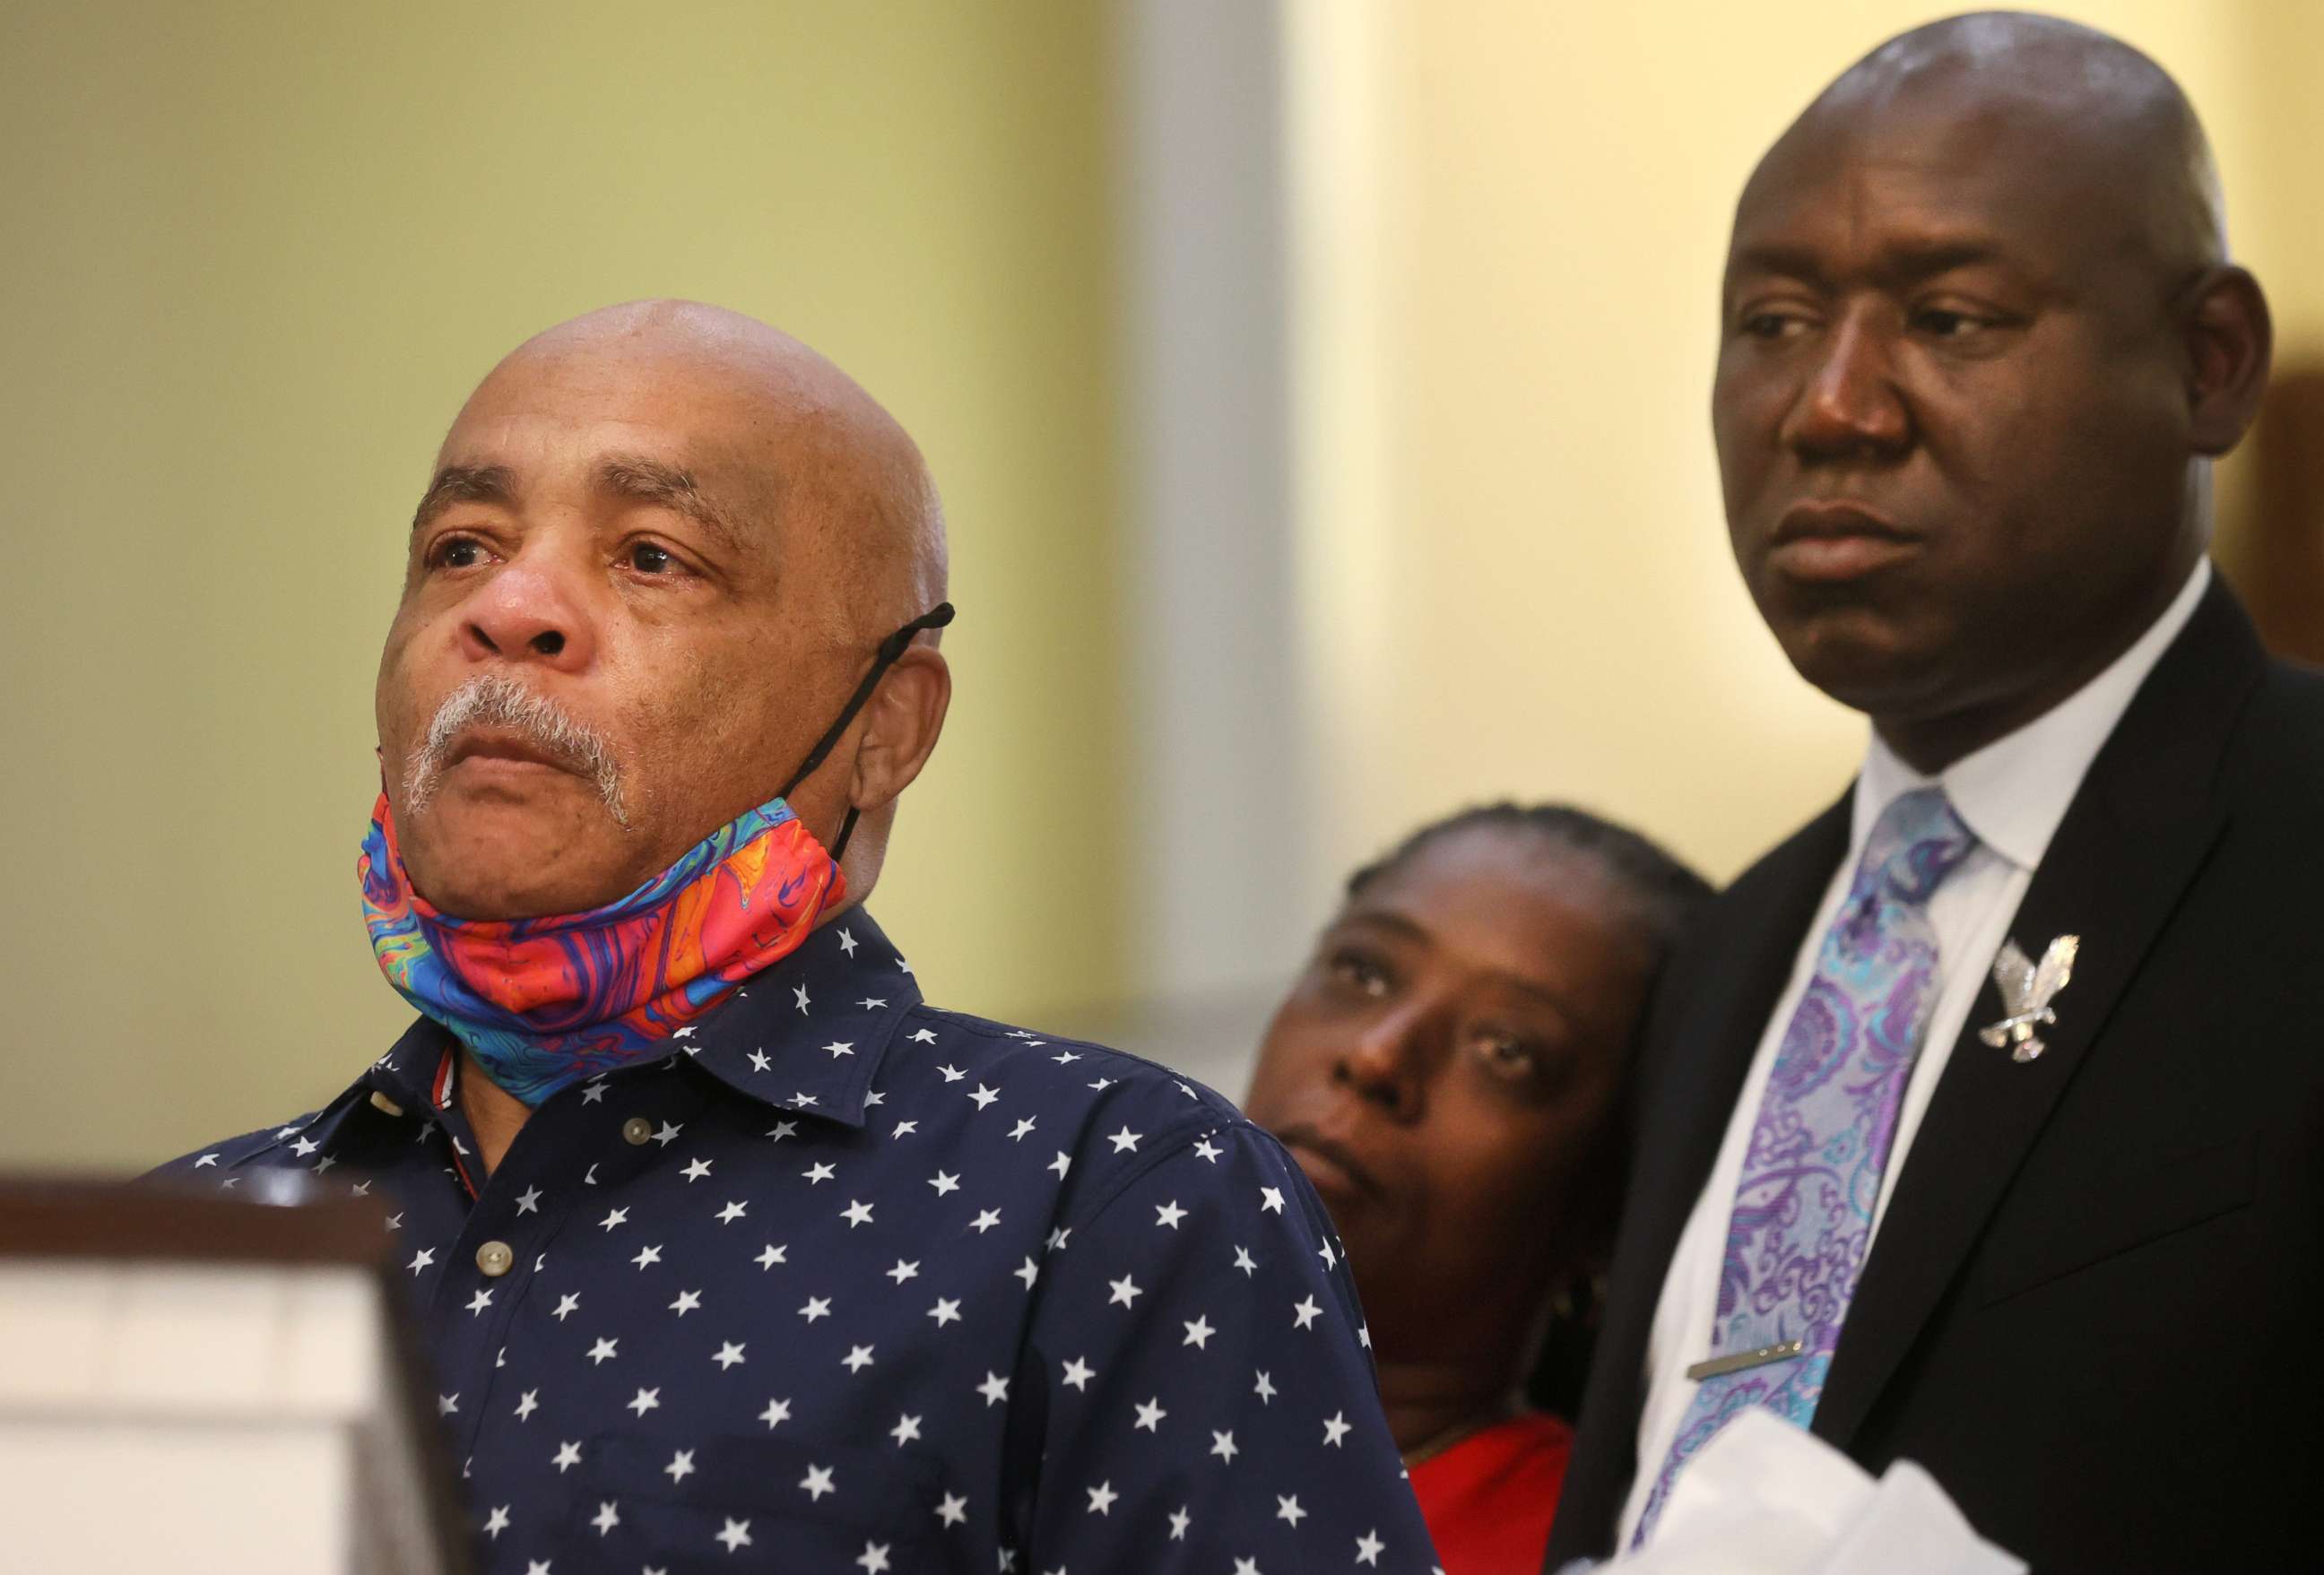 PHOTO: Alvin Motley Sr. speaks during a press conference on Aug. 10, 2021, at Mt. Olive CME Church in Memphis, Tenn., about the shooting death of  his son Alvin Motley.